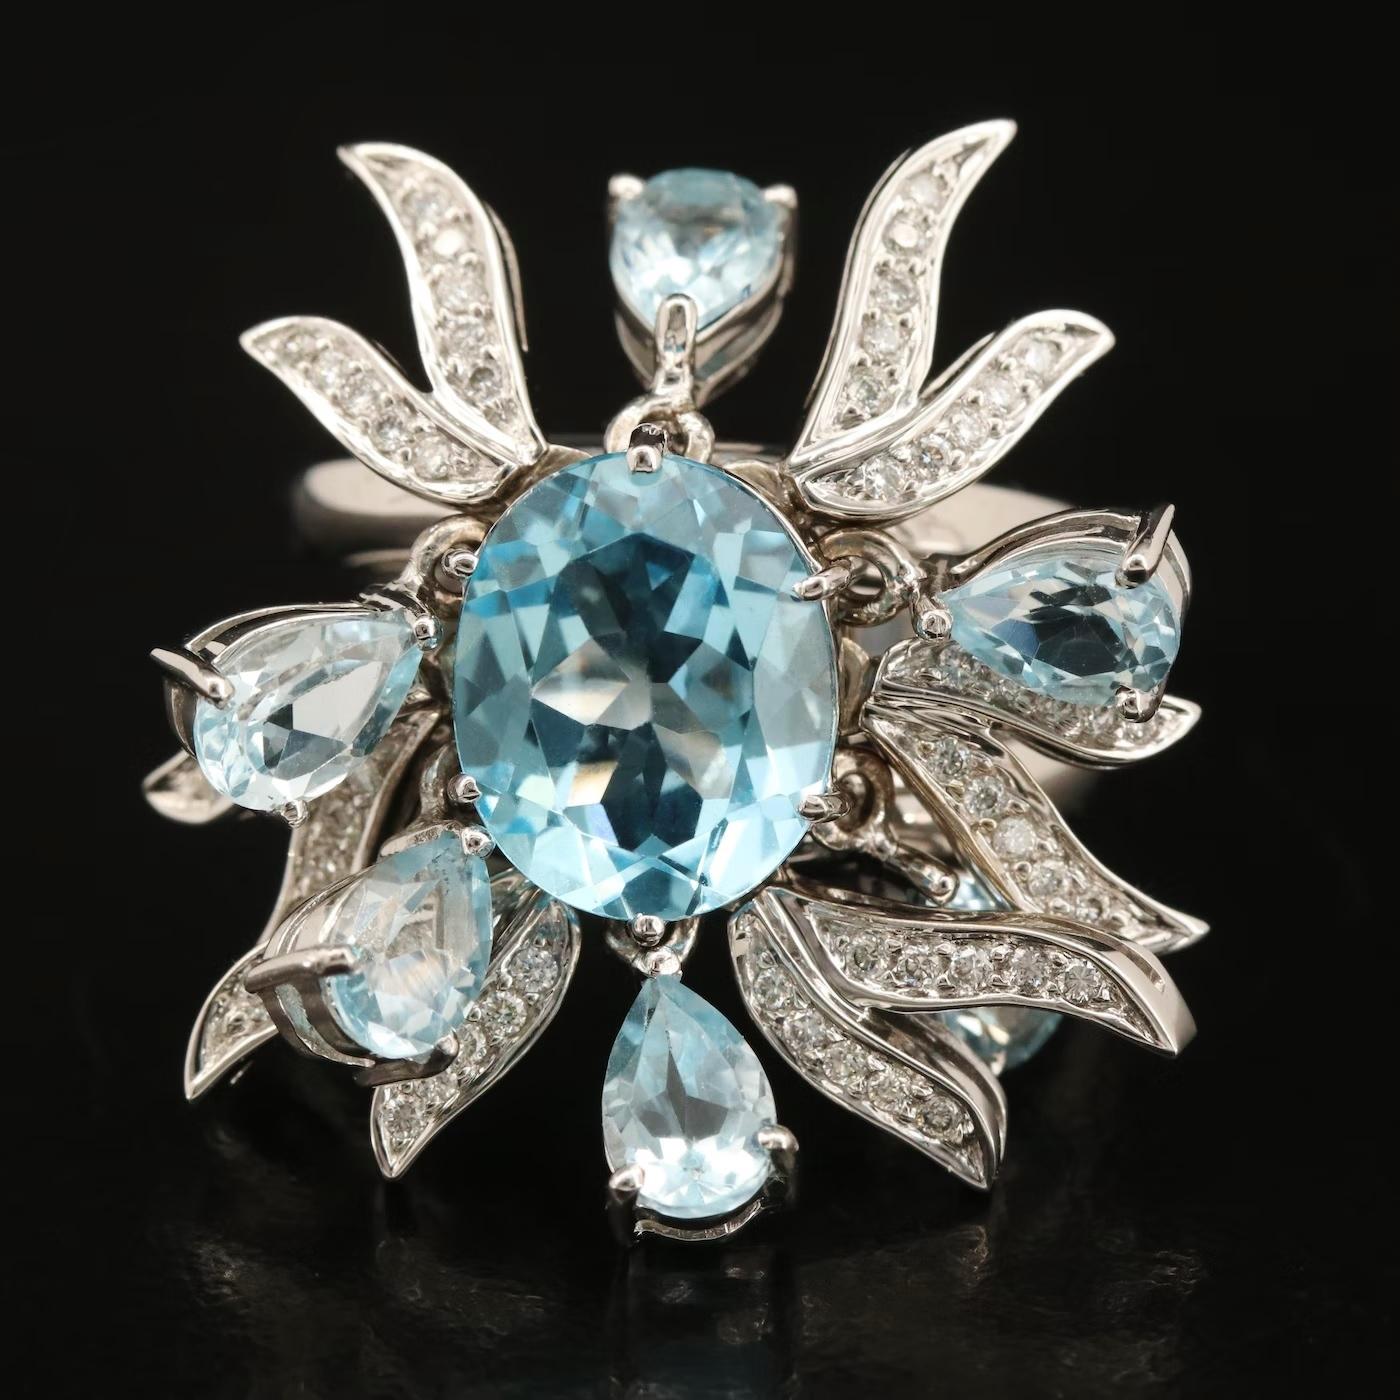 Ruth Grieco for Denoir Designer ring - fully hallmarked

One of a kind, custom, Iconic collection (made to order by Denoir-PARIS)
NEW WITH TAGS, Tag Price $22500

Articulated flower design, moving flower pedals 

13.9 grams in weight 

18K White